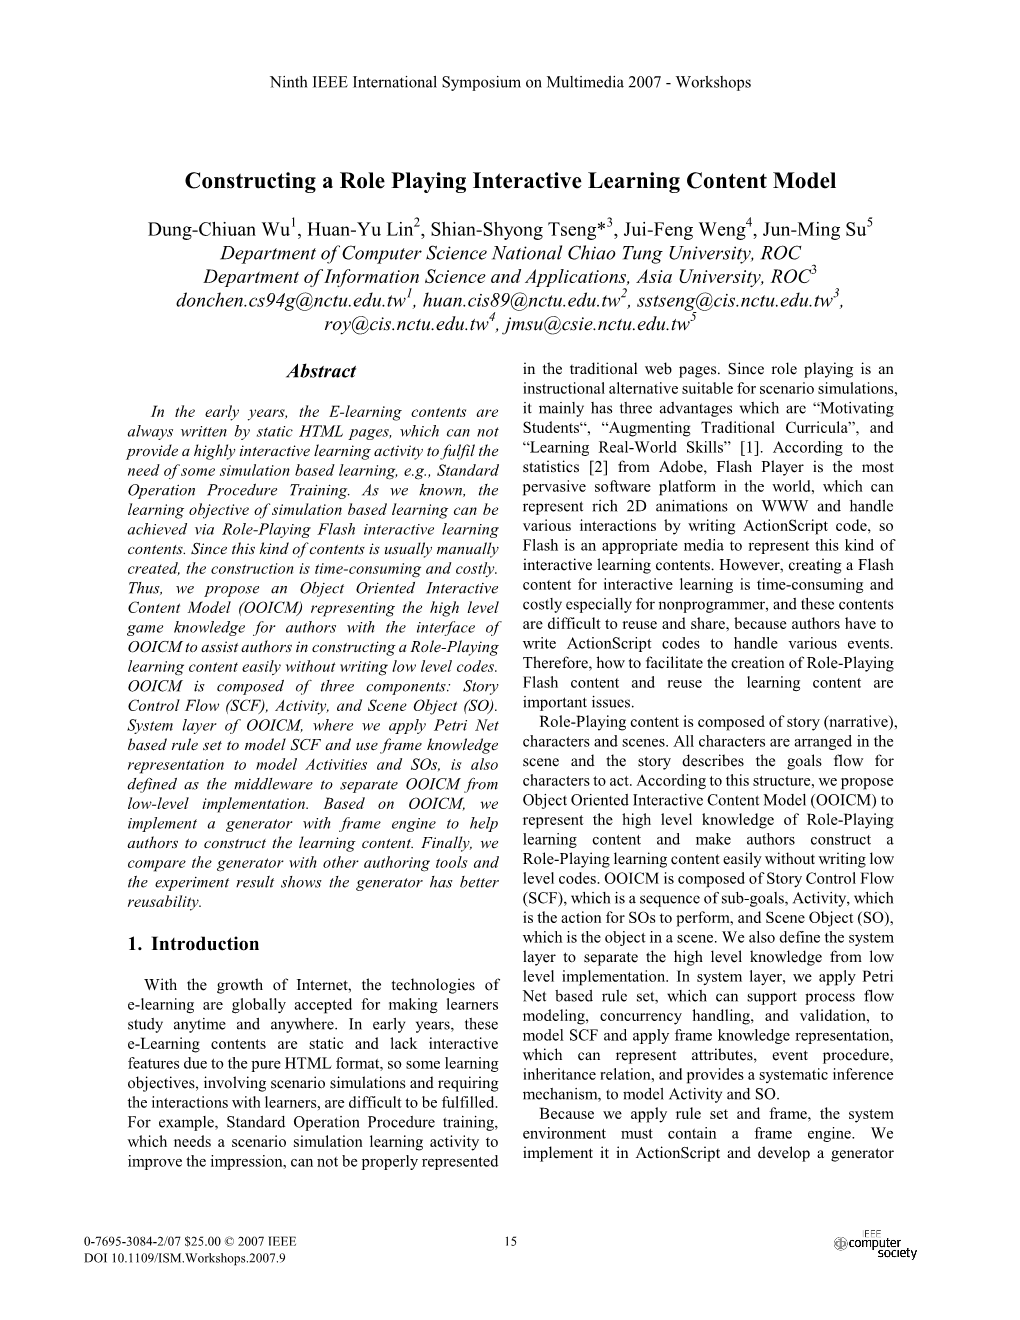 Constructing a Role Playing Interactive Learning Content Model